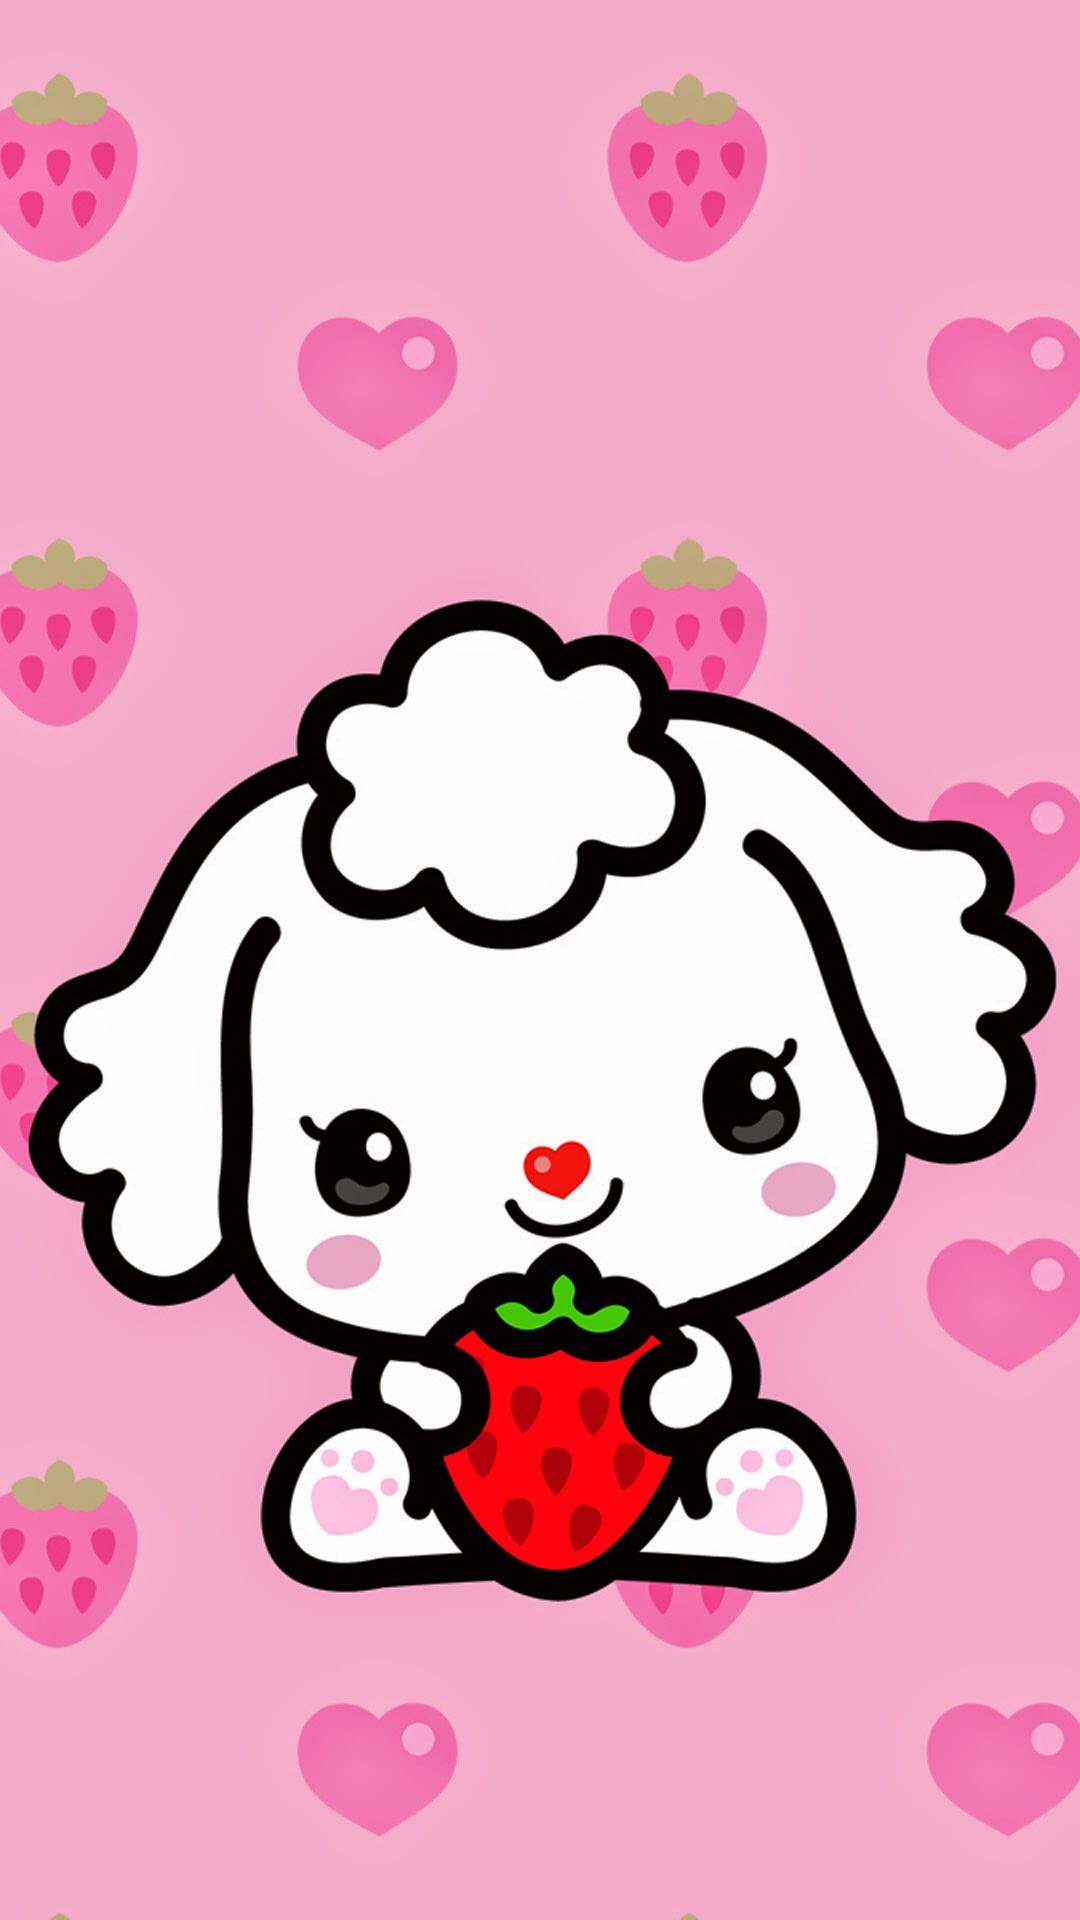 1080x1920 Page Background, Background Ideas, Kawaii Cute, Iphone Wallpaper, Lamb,  Punch, Strawberry, Sanrio, Cartoons